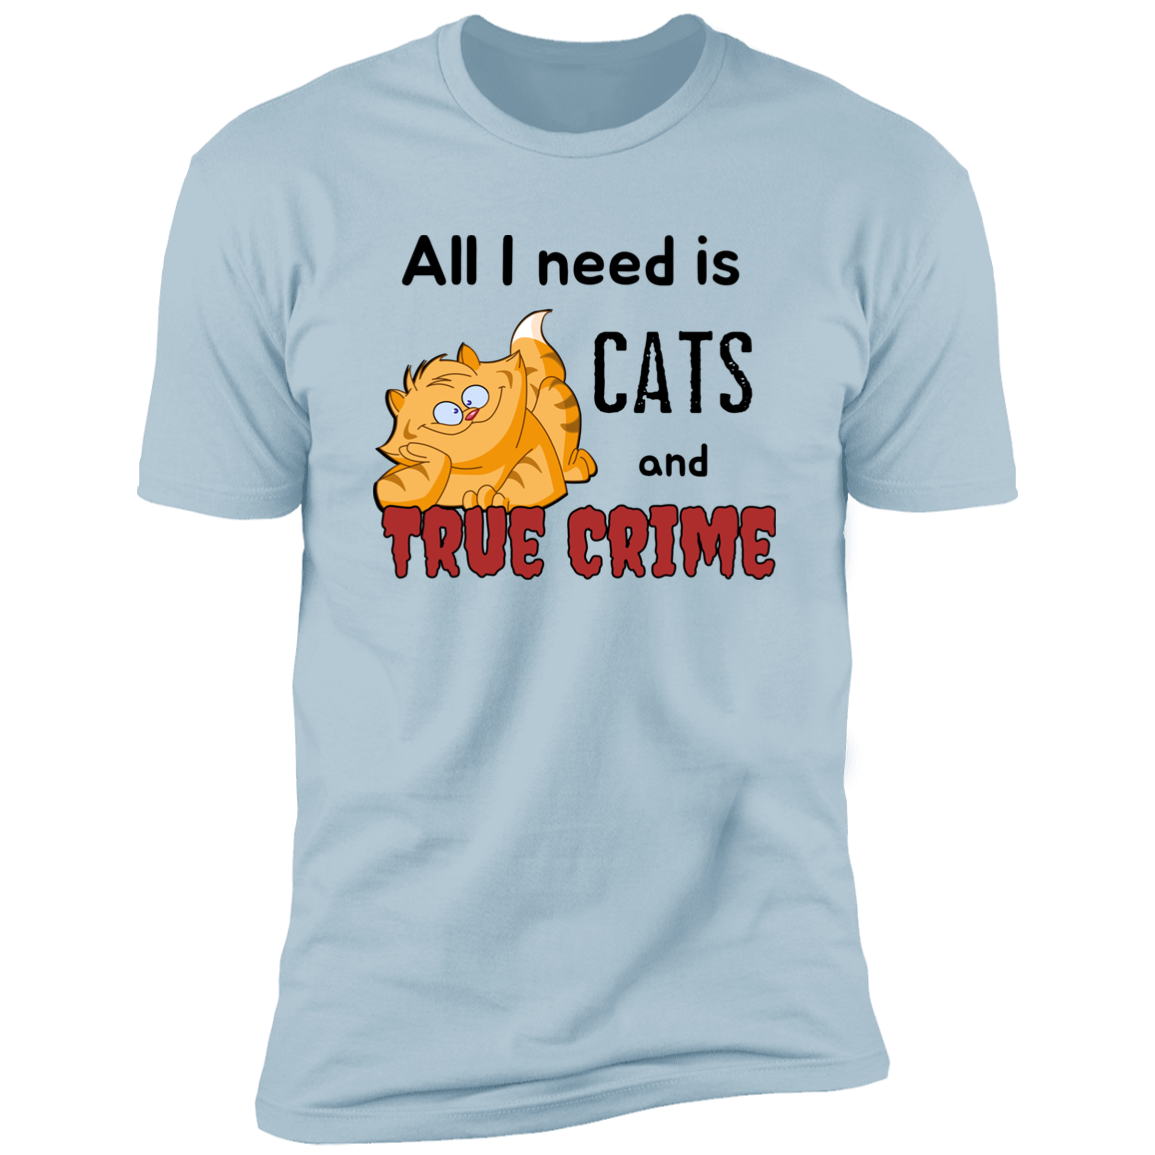 All I Need is Cats and True Crime, Cat shirt for humas, in light blue